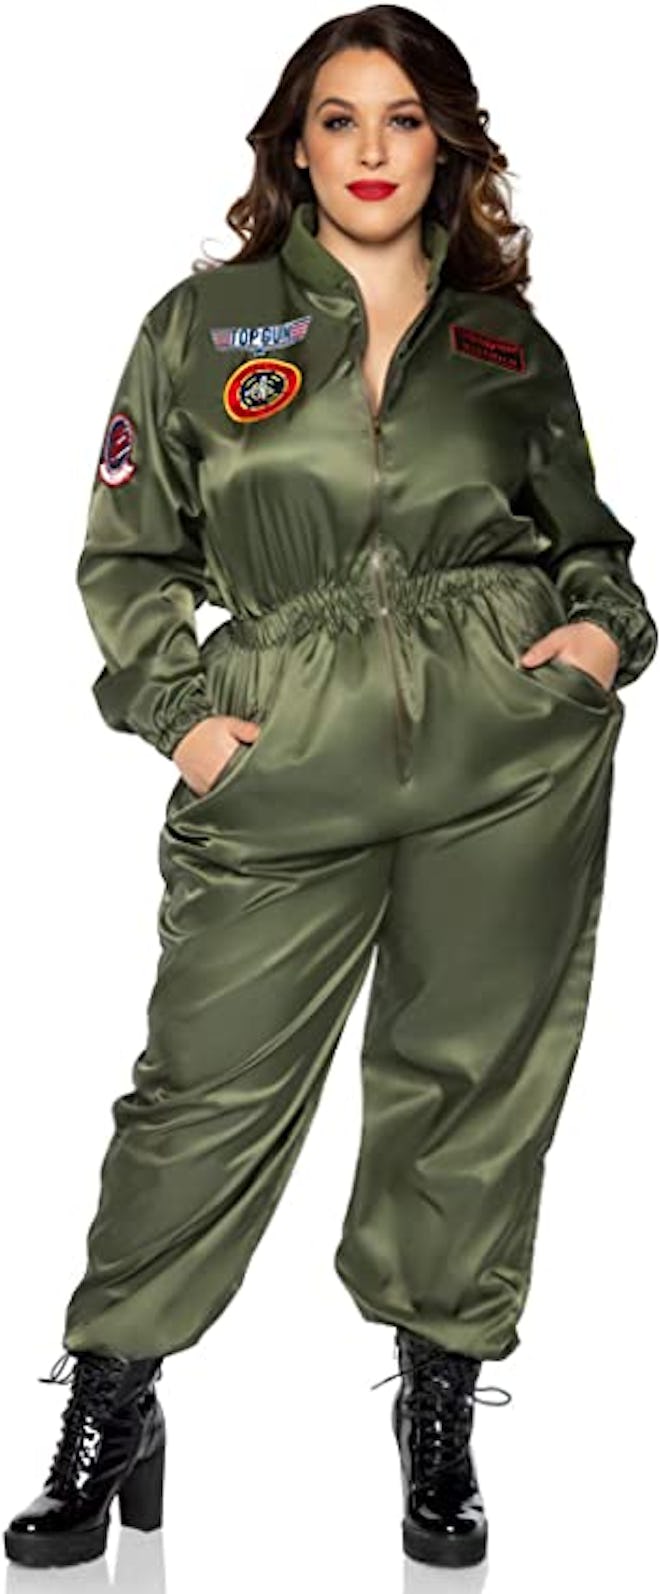 This plus size Top Gun costume is a shiny flight suit with patches authentic to the movie.